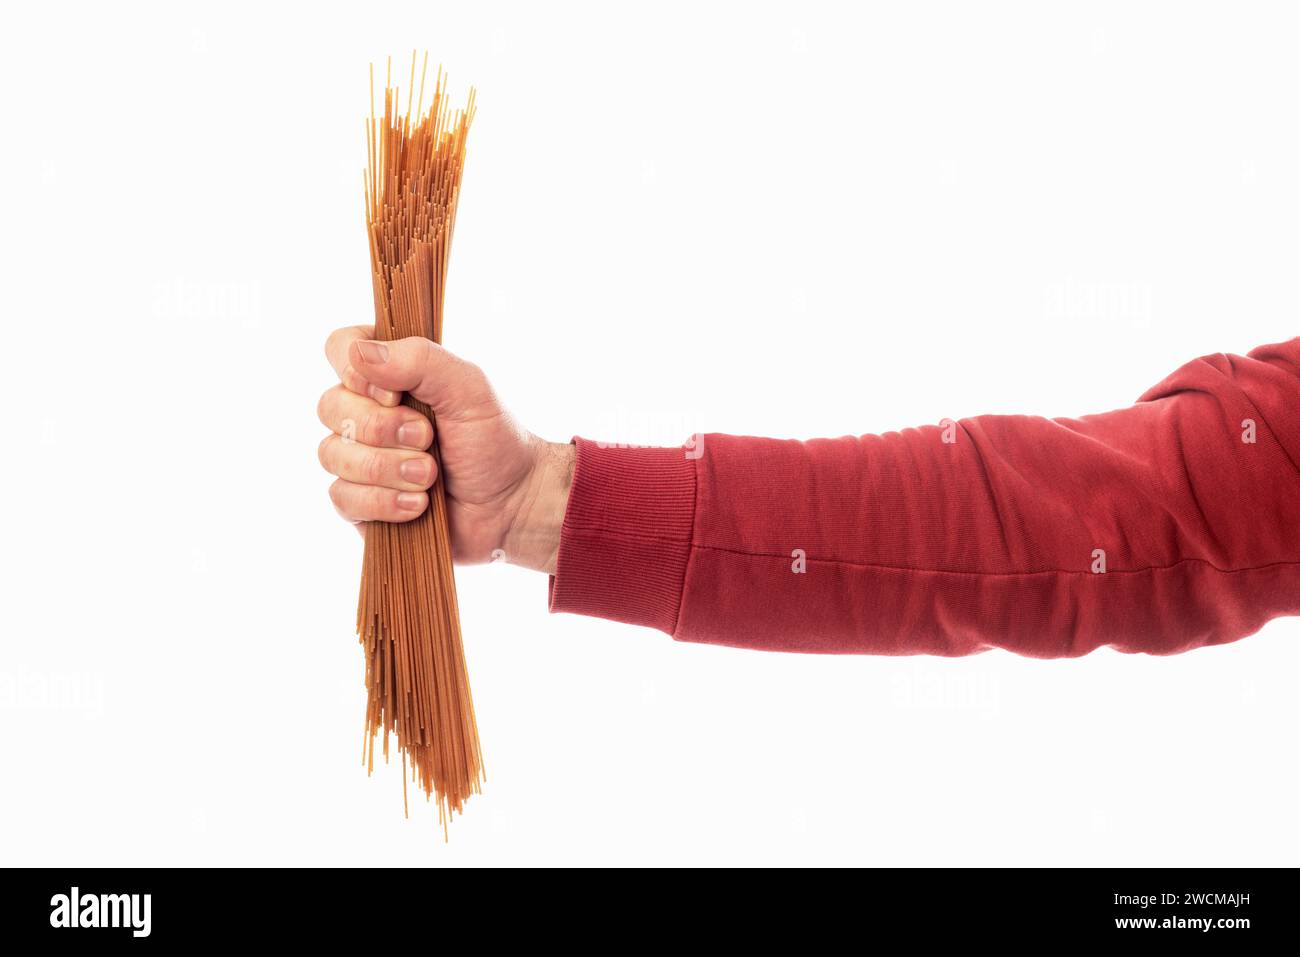 The hand of a man in a red sweater holding a set of spaghetti on a white background. Carbohydrates and whole wheat pasta in the diet Stock Photo